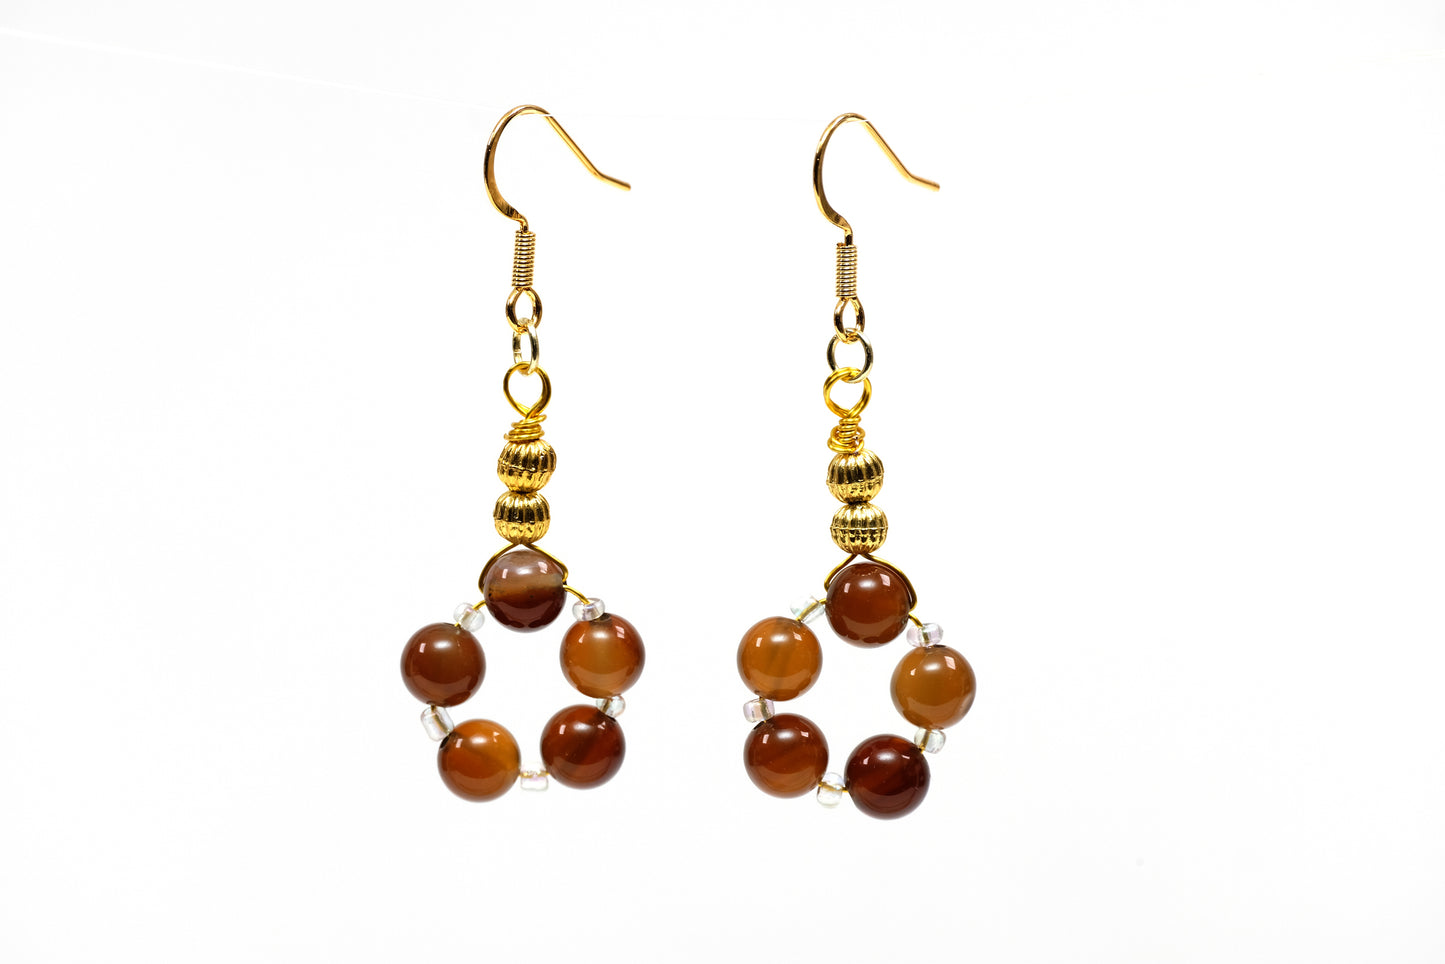 Dewi Maya Jewelry Earrings Chestnut Pearl Gold plated bead earrings available at the best boutique in Upstate South Carolina Spartanburg Greenville Dewi Maya Boutique